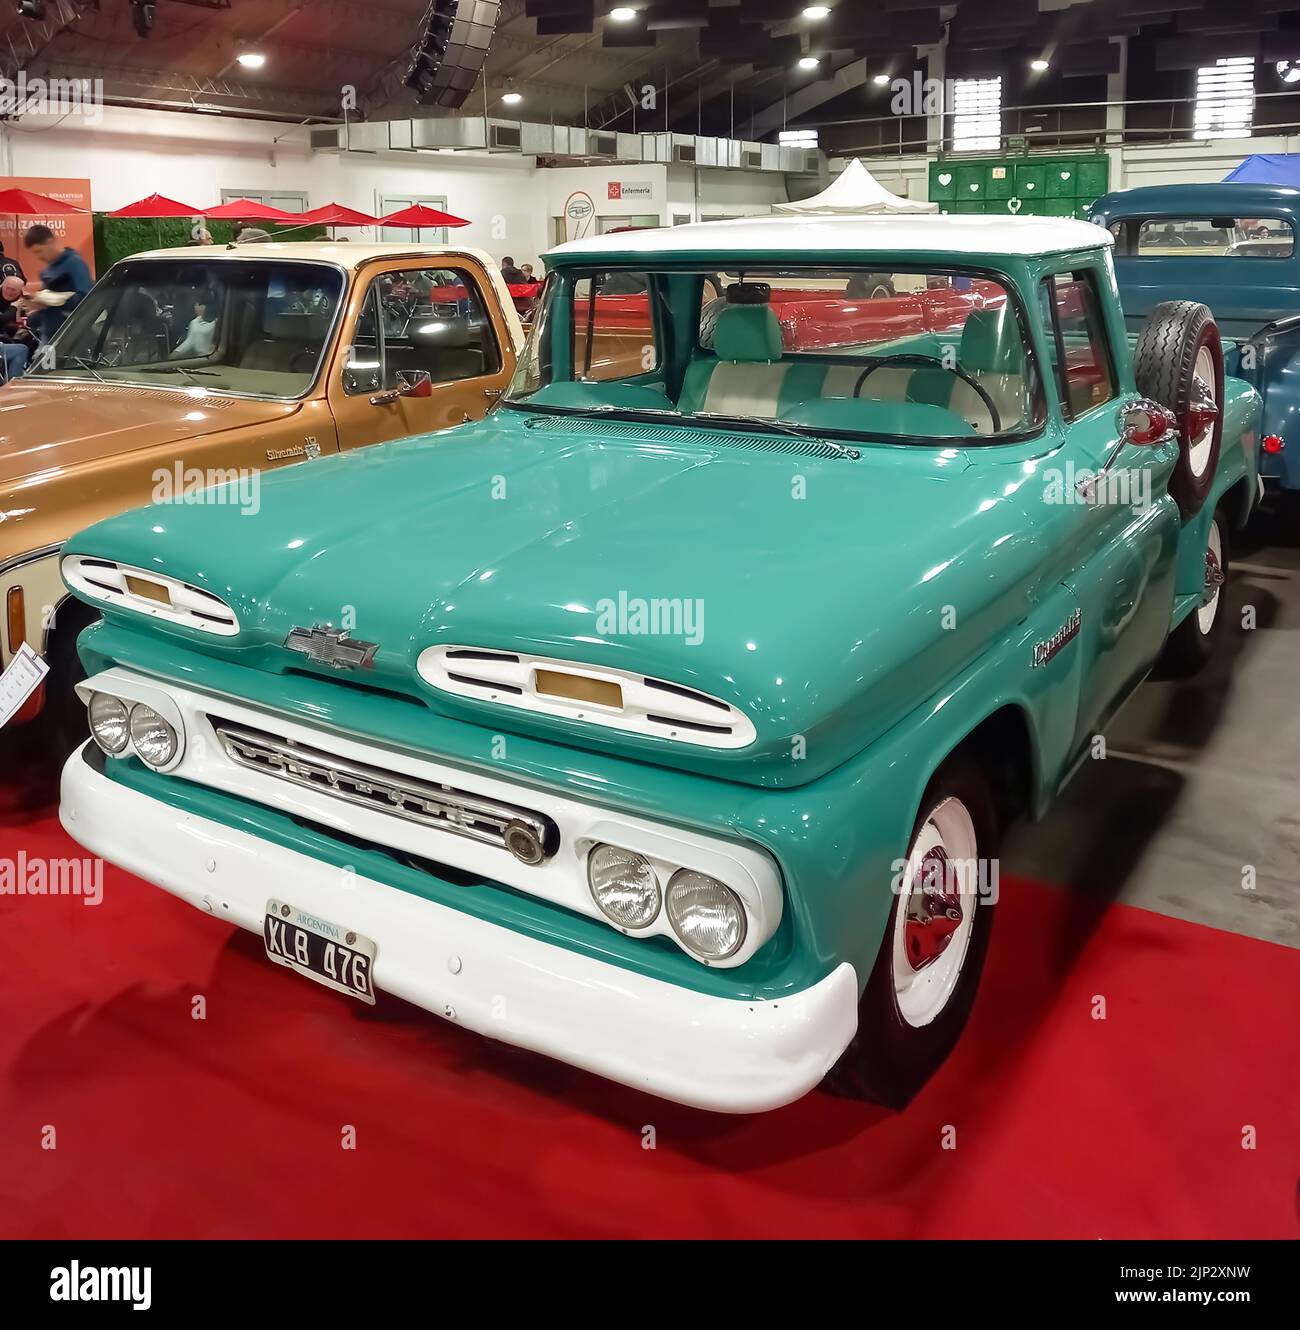 Old aqua and white Chevrolet Chevy C10 Apache pickup truck early 1960s. Utility or farming tool. Exhibit hall. Classic car show. Stock Photo